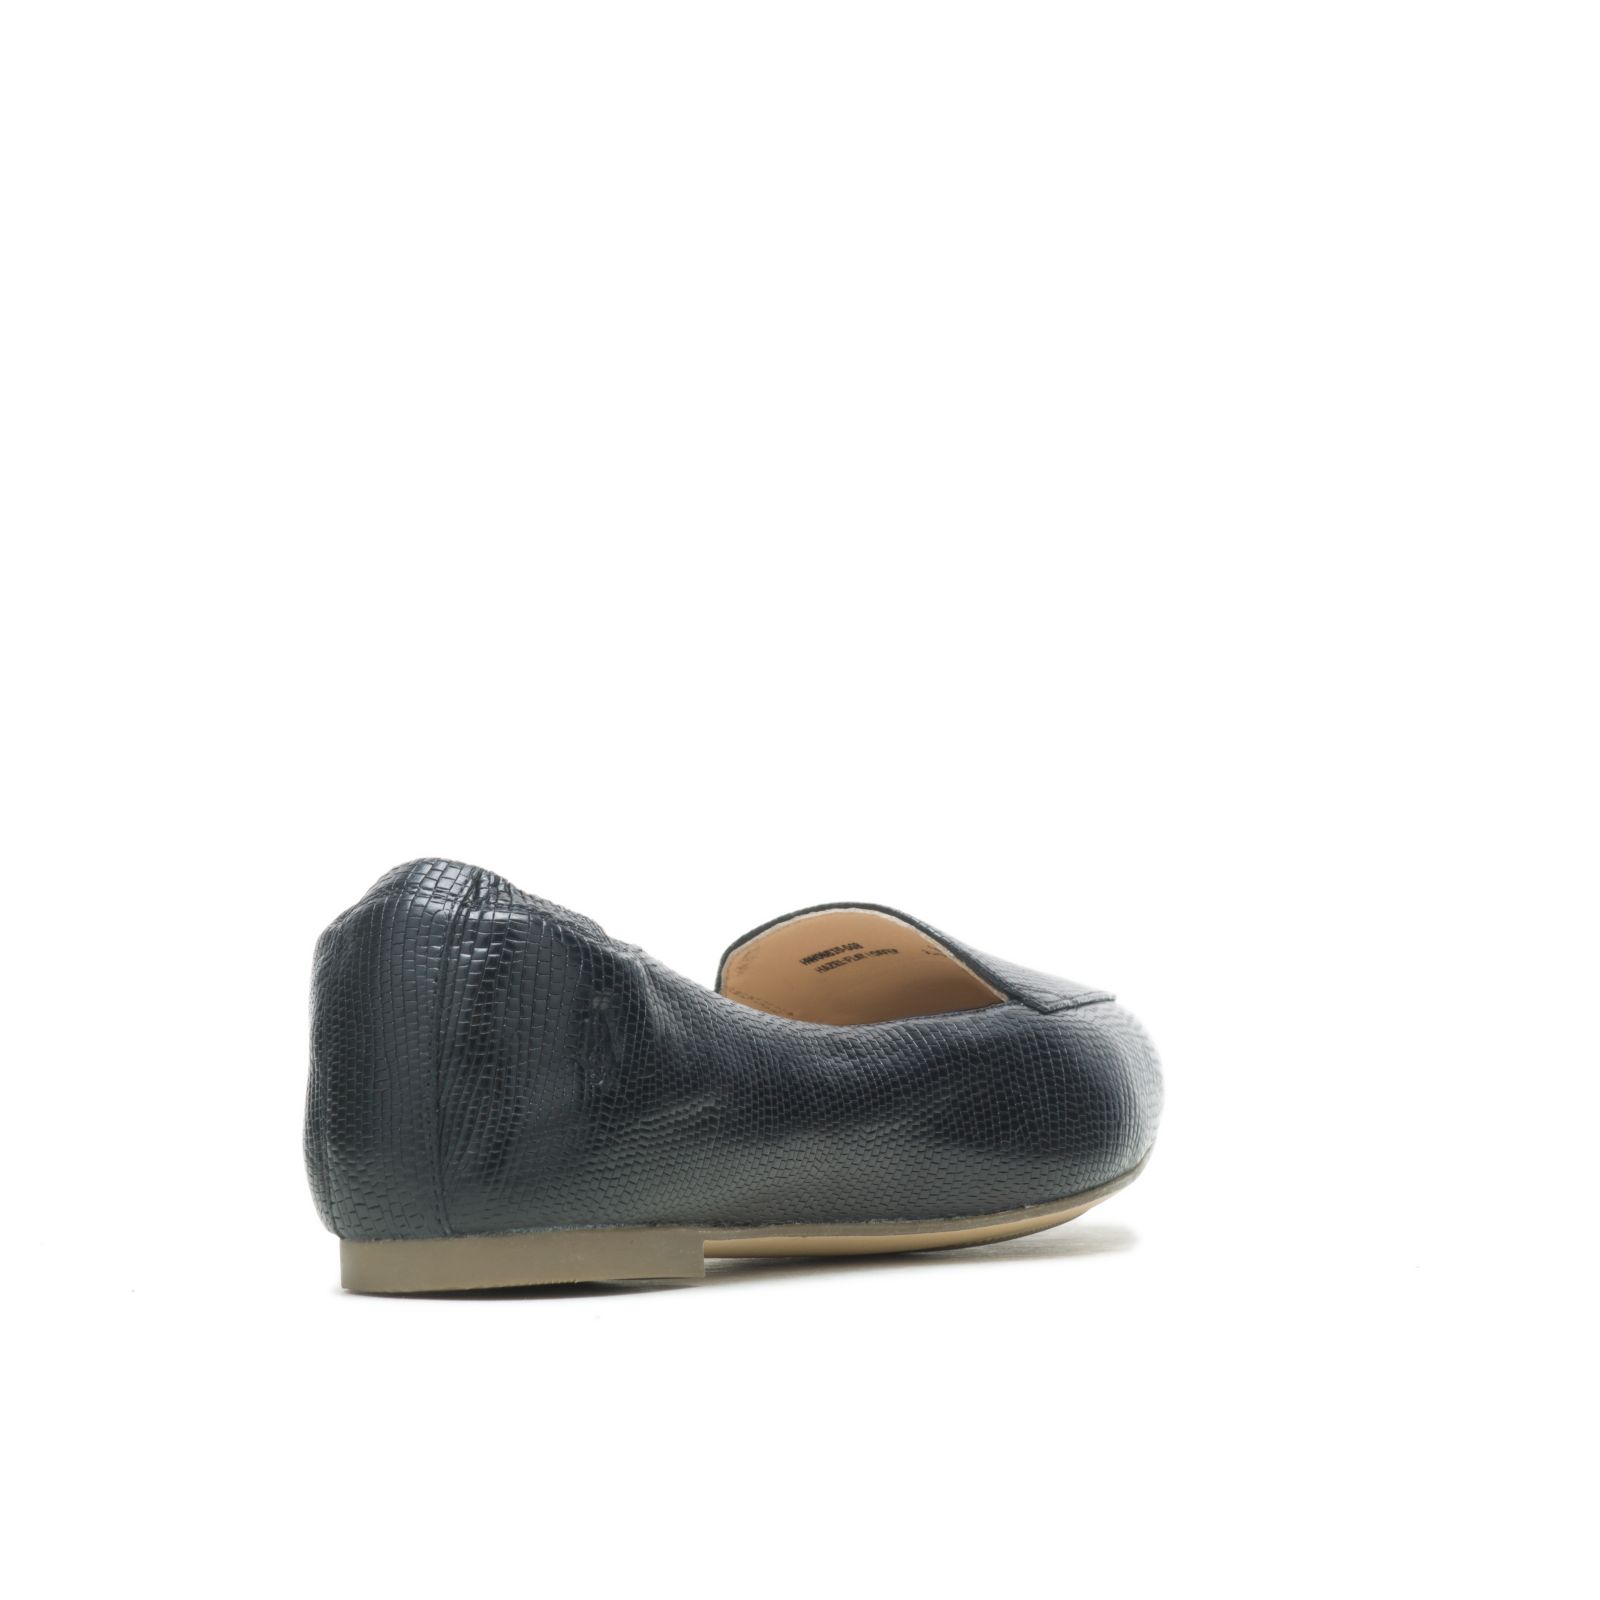 Loafers Hush Puppies Hazel Pointe Mujer Negros | TQDVHWJ-46